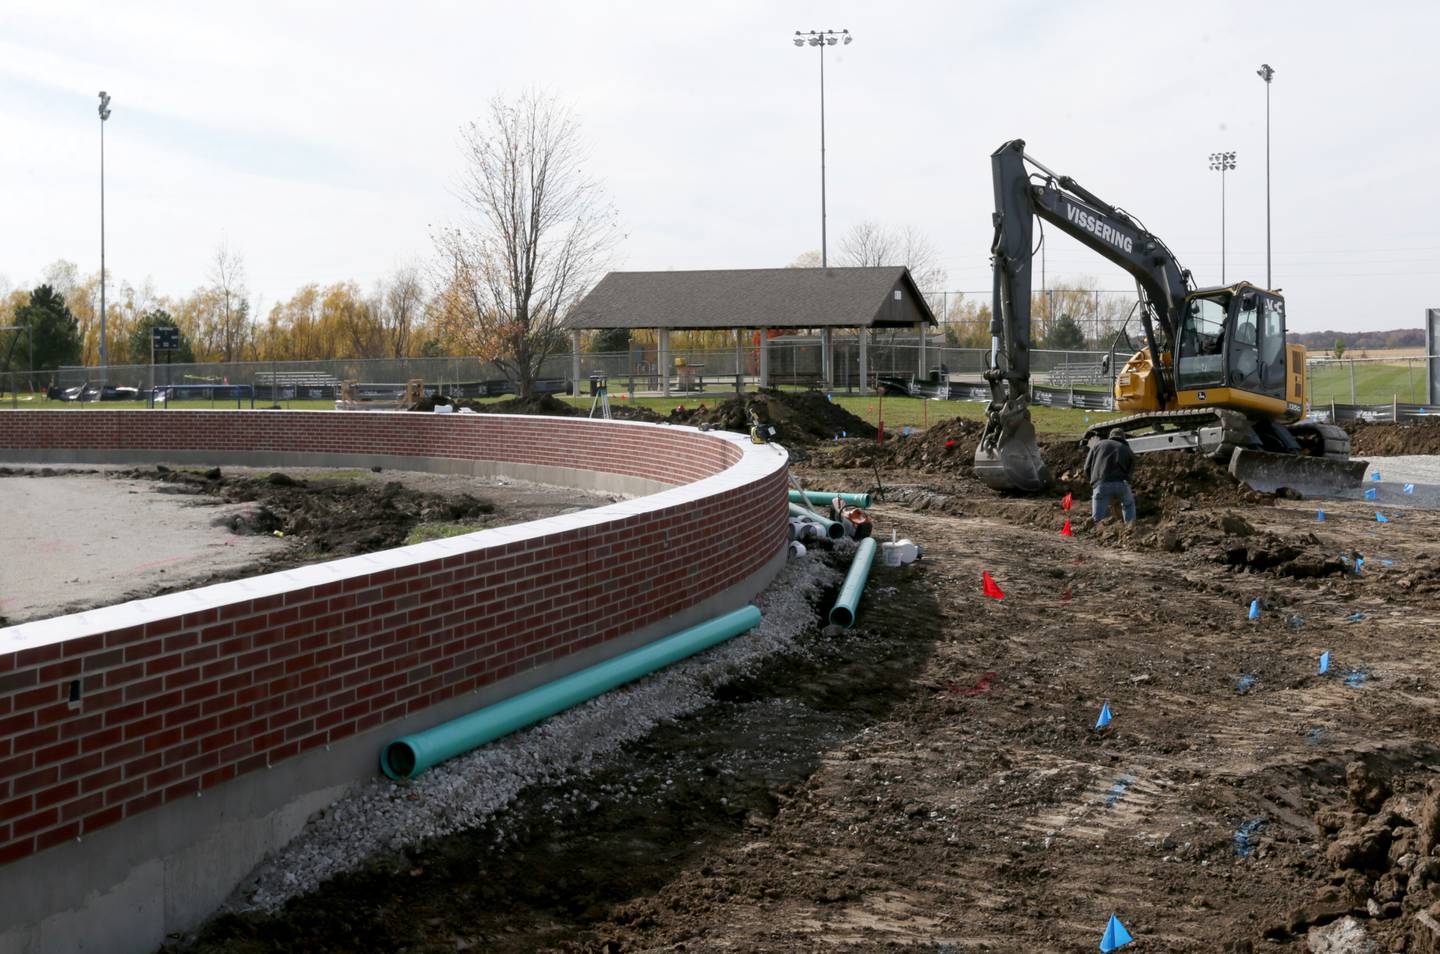 Workers with Vissering Construction dig ground behind home plate at Schweickert Stadium on Thursday, Oct. 27, 2022 at the home of Illinois Valley Pistol Shrimp baseball at Veterans Park in Peru.